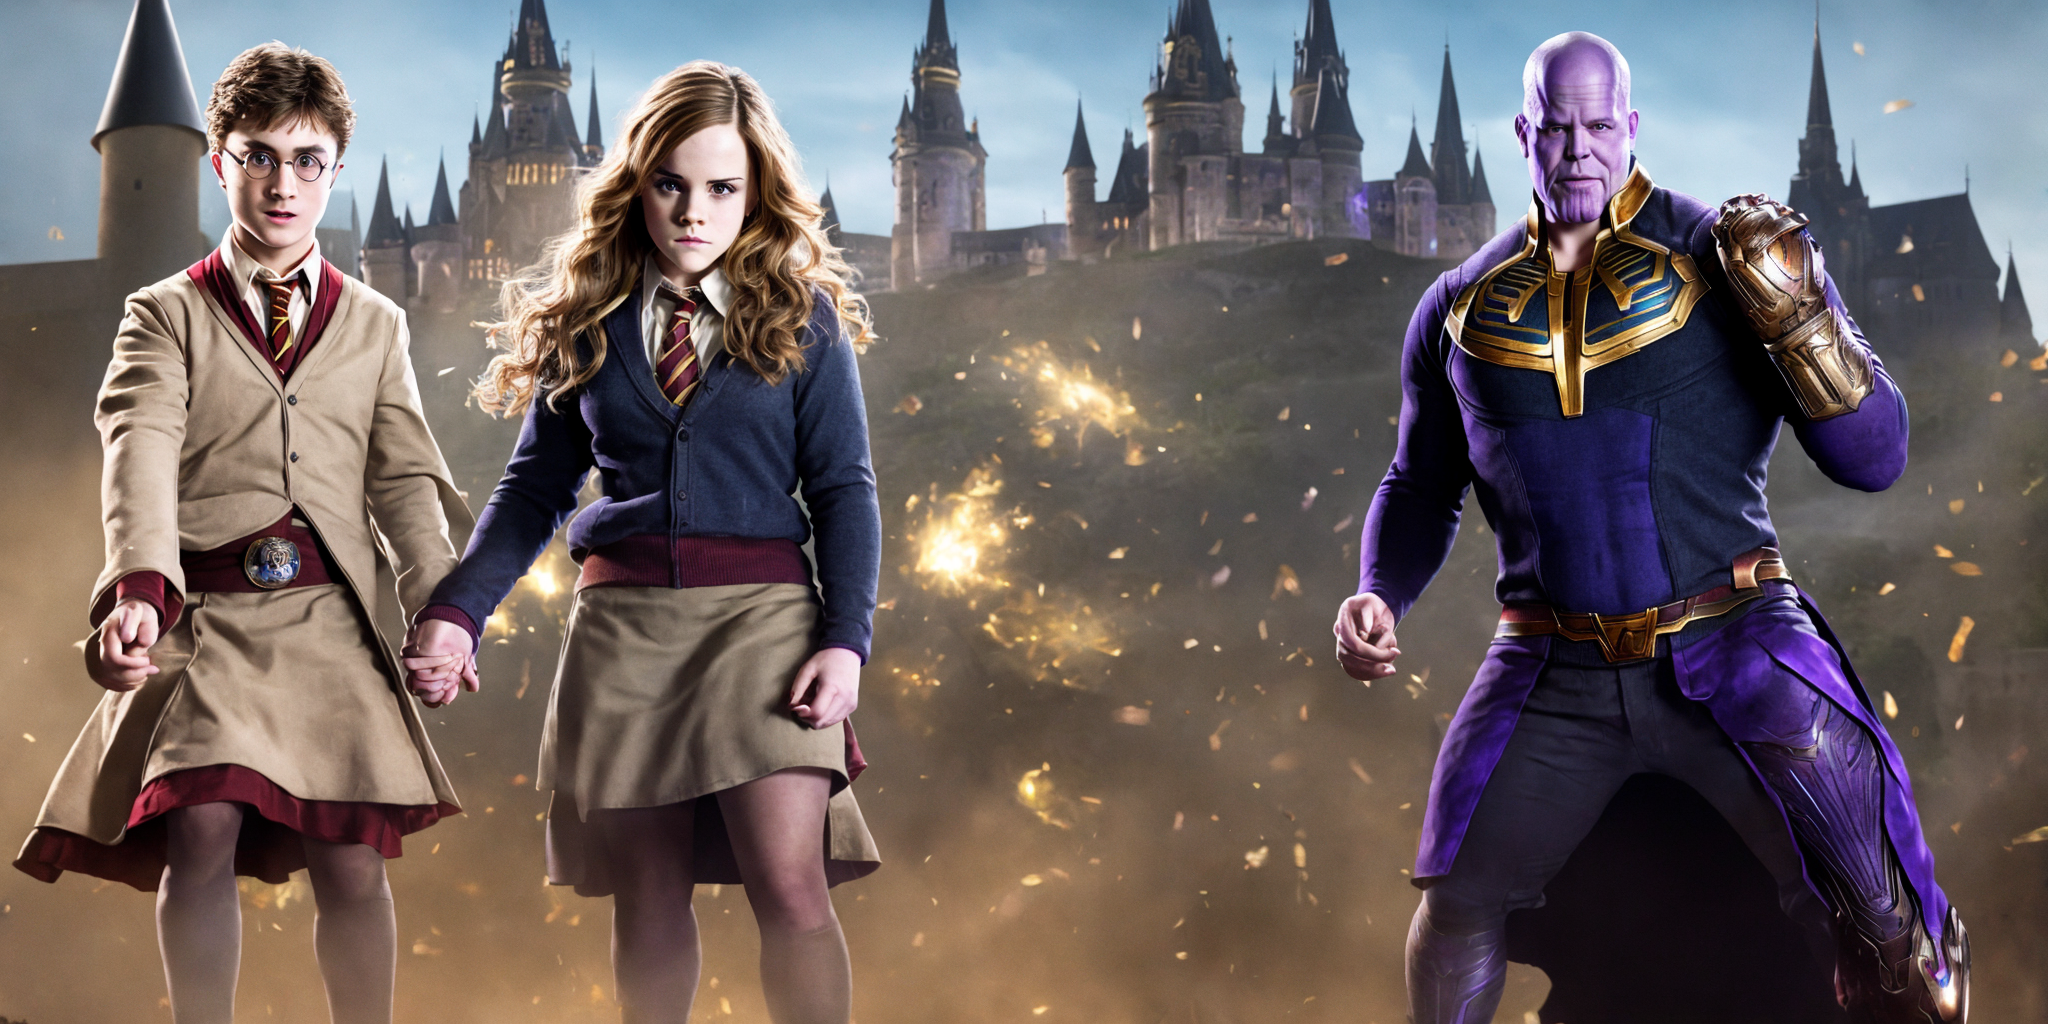 a_<potter1><potter2>,a<hermione1><hermione2>and_a<thanos1>_<thanos2>_near_the_castle,_4K,_high_quality,_high_resolution,_best_quality---baseline---e27b4344